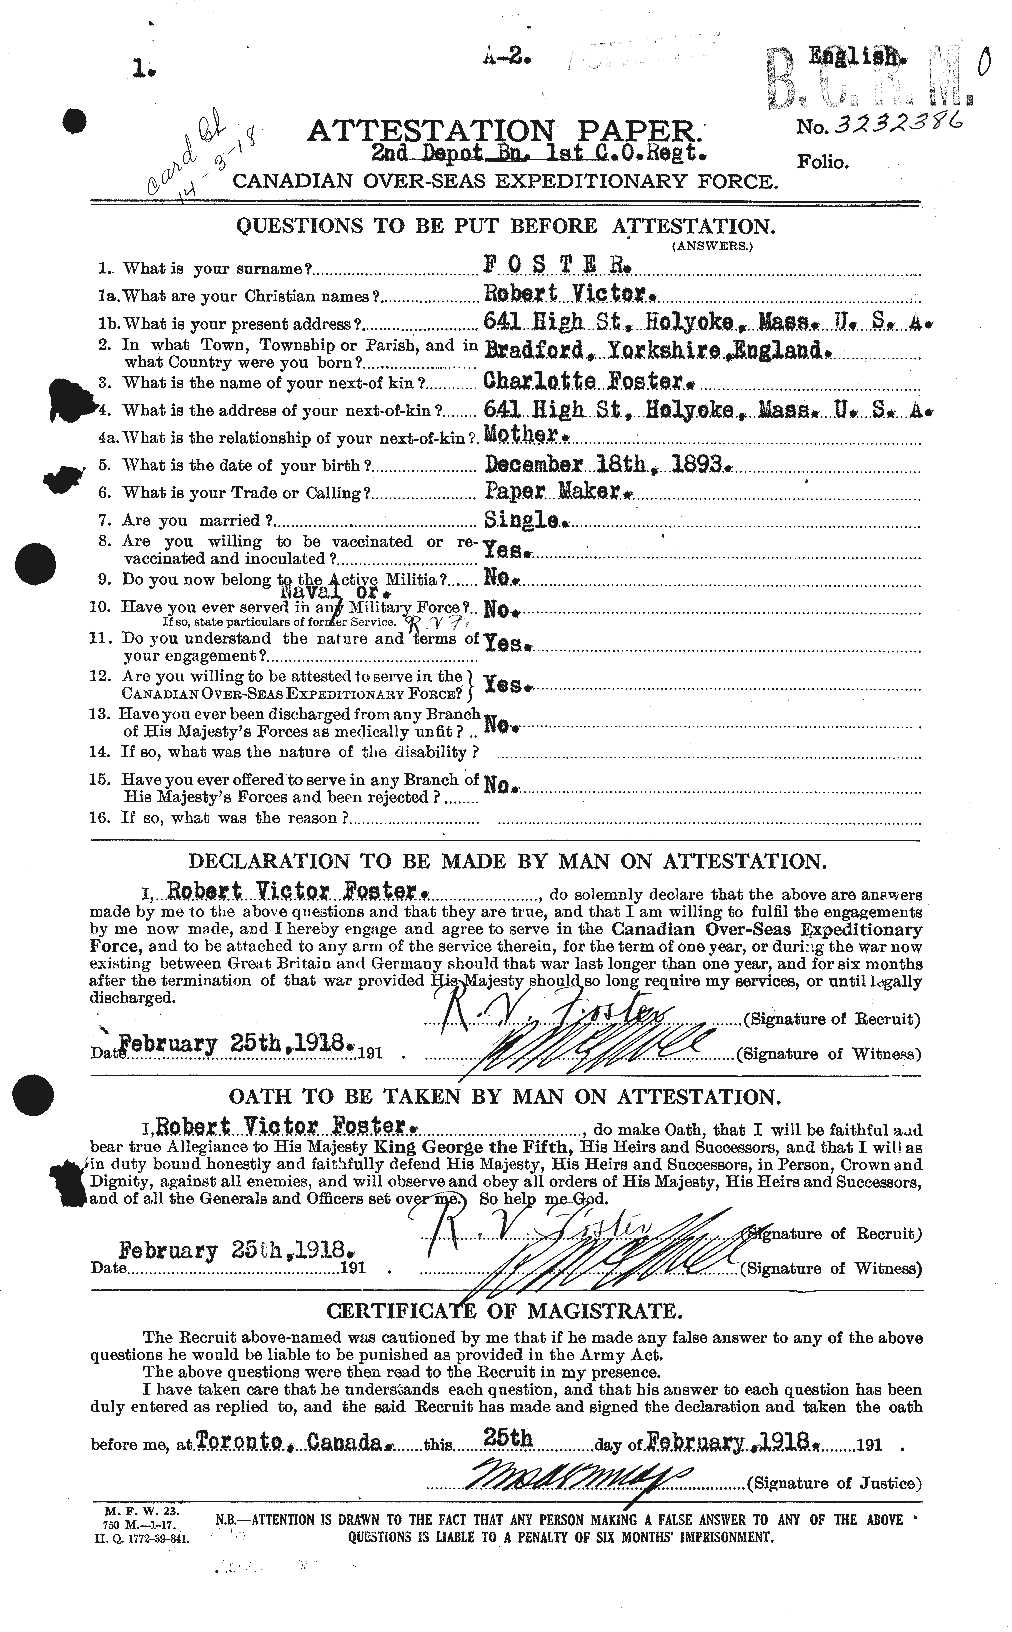 Personnel Records of the First World War - CEF 335188a